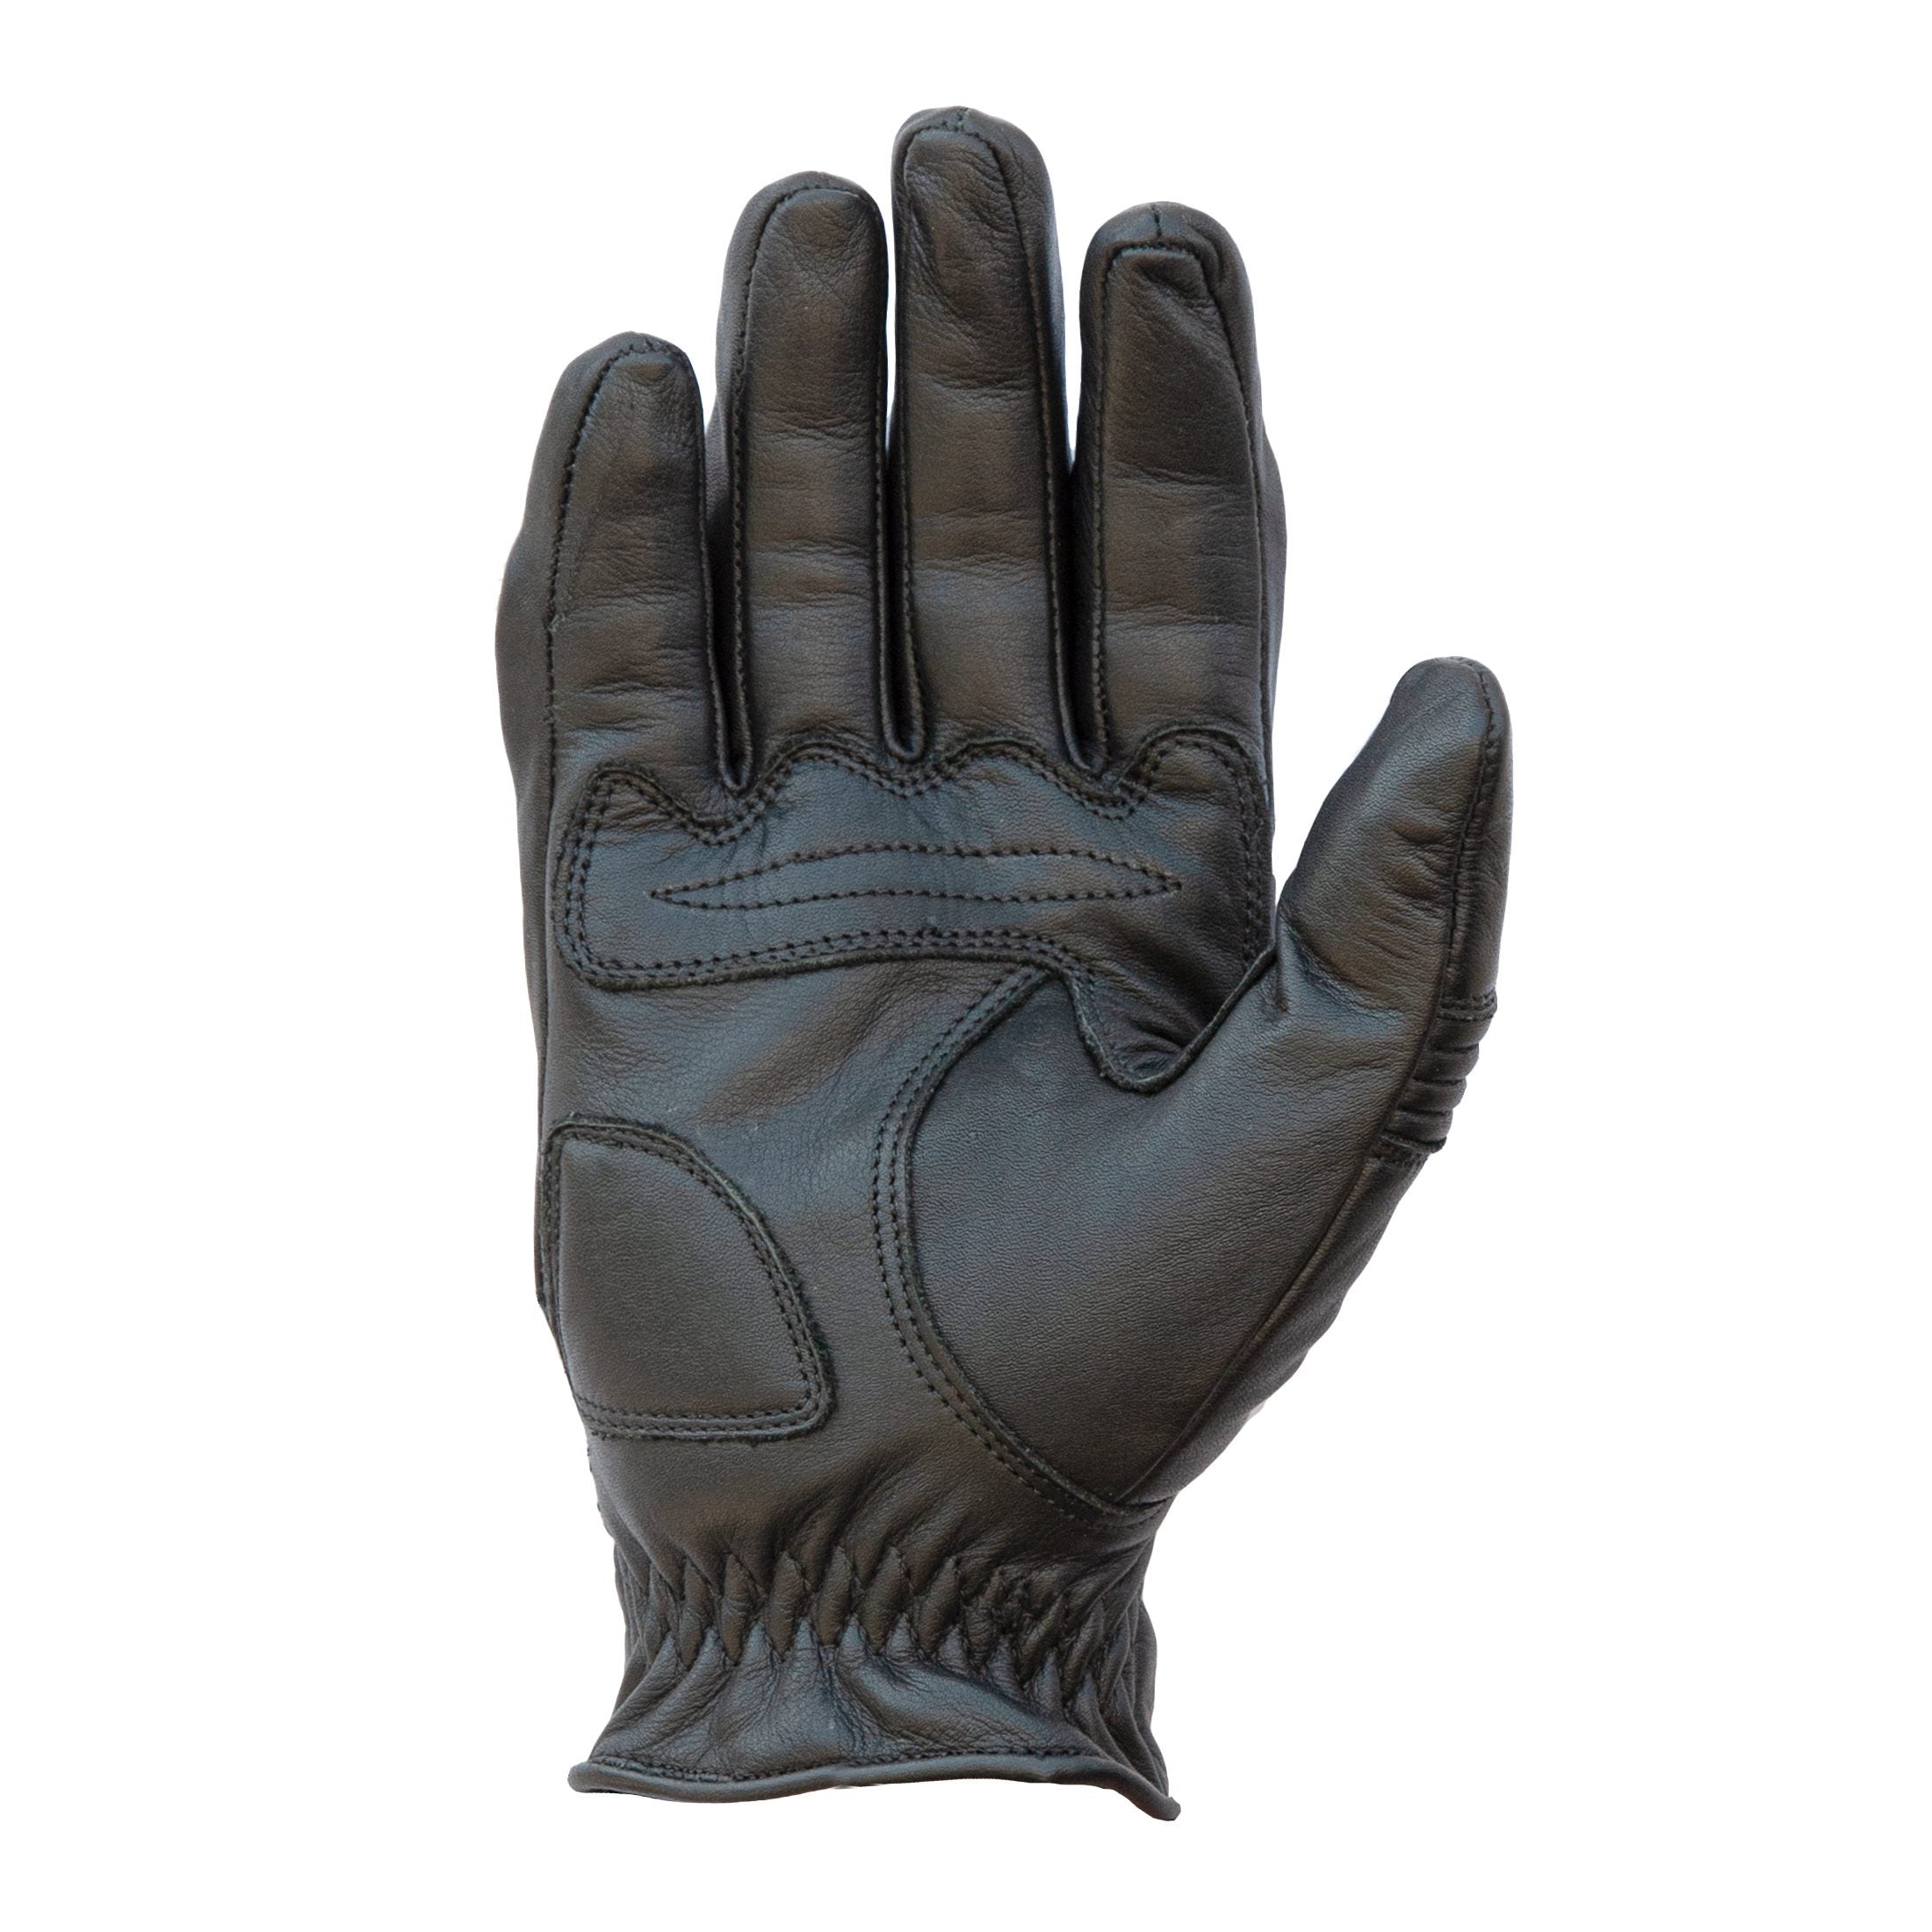 Age of Glory Garage Leather CE Gloves Black